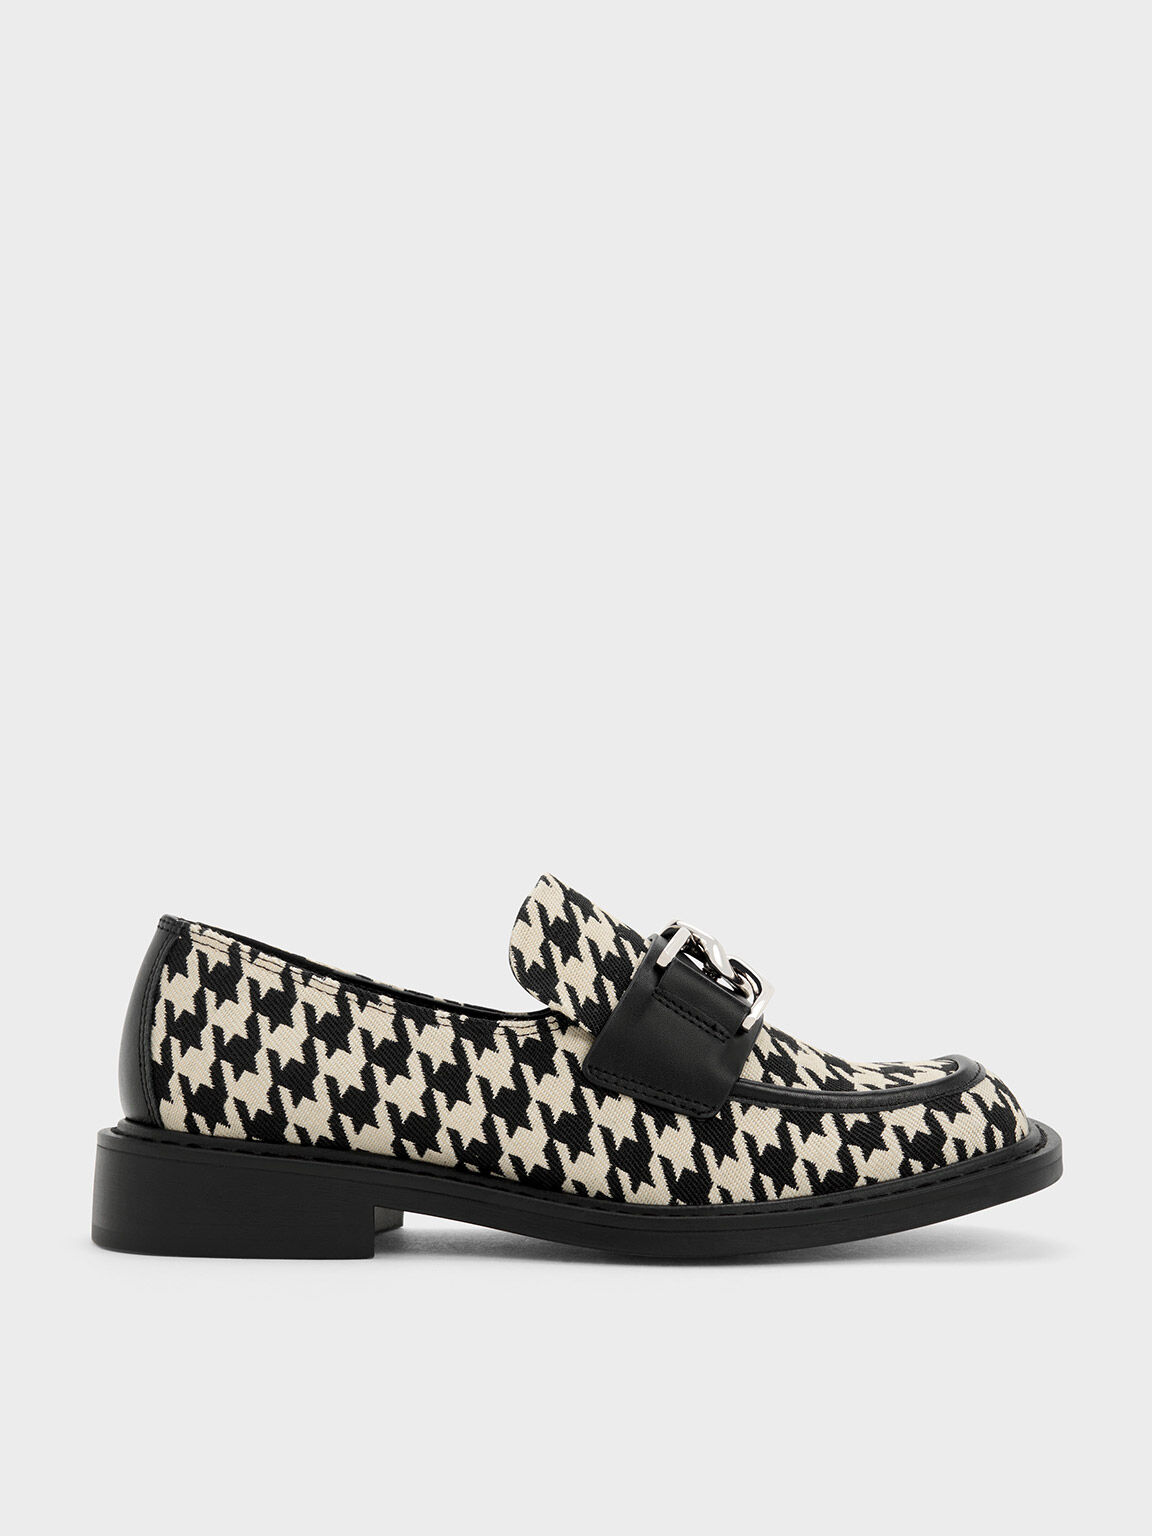 Women's Flat Loafers | Shop Exclusive Styles | CHARLES & KEITH SG